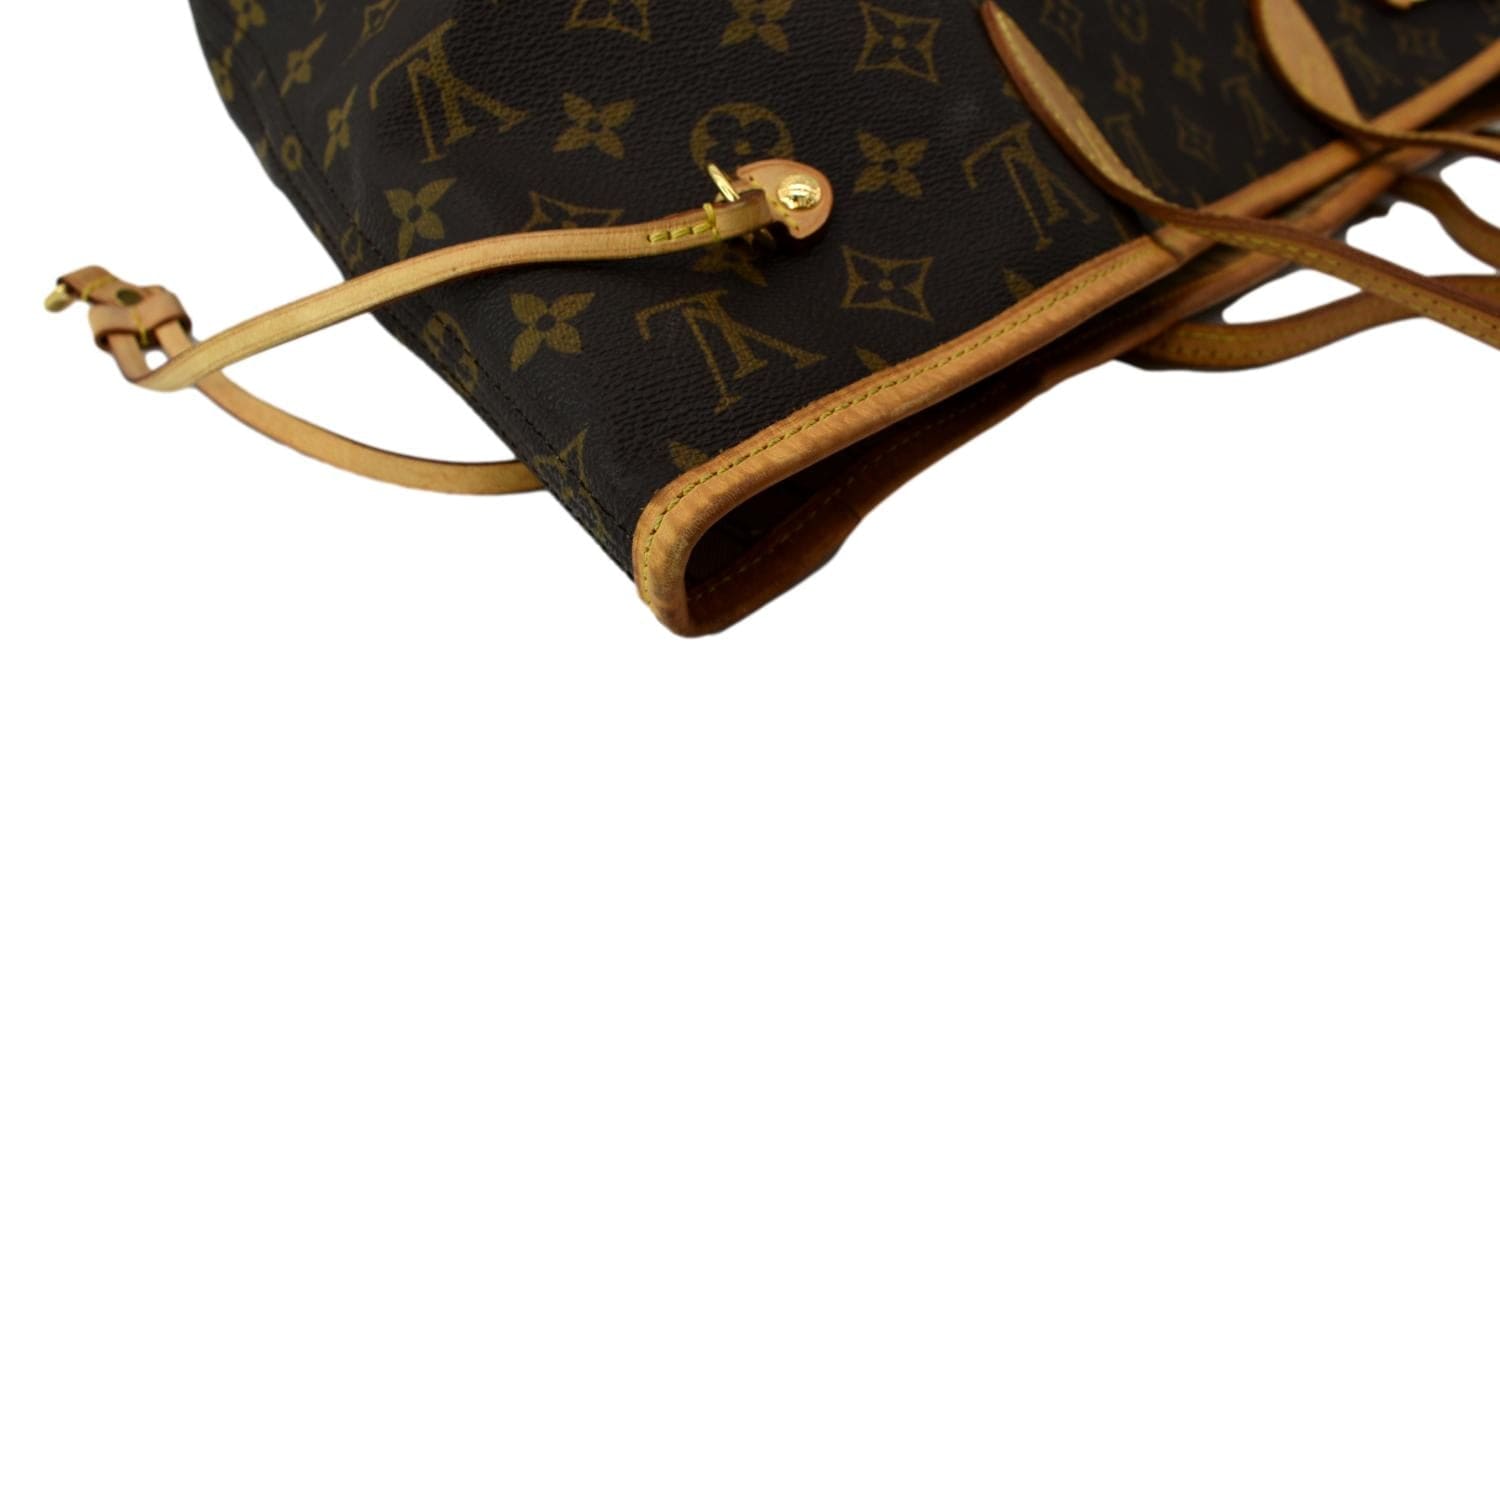 Louis Vuitton Brown Monogram Coated Canvas Leather Totem Neo Neverfull mm Gold Hardware, 2015 (Like New), Womens Handbag